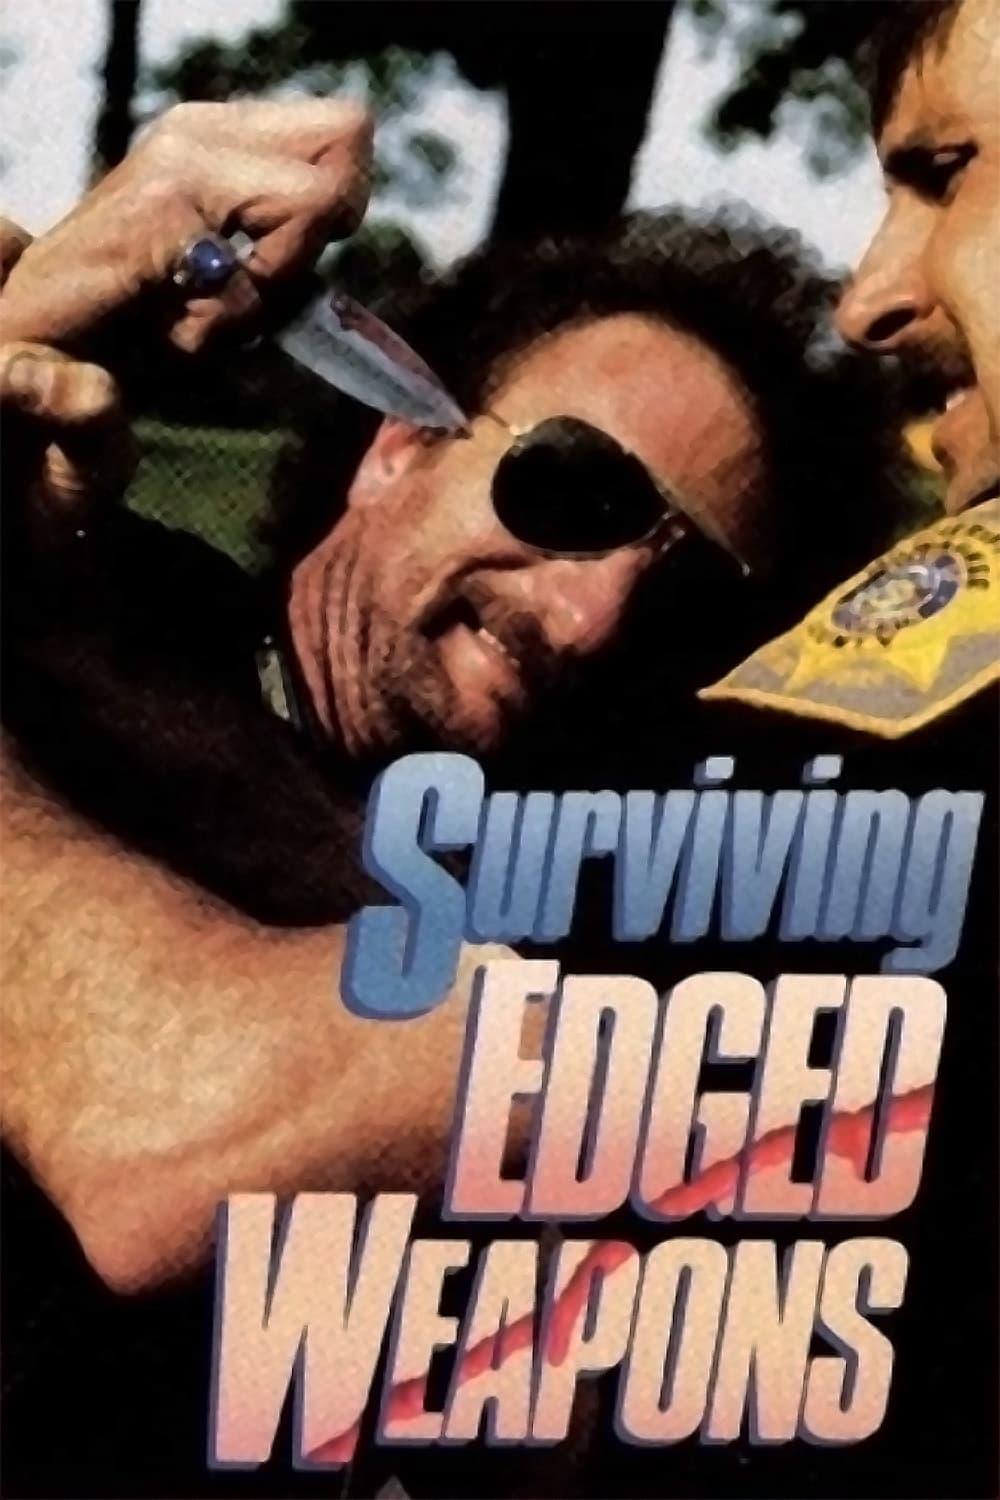 Surviving Edged Weapons poster